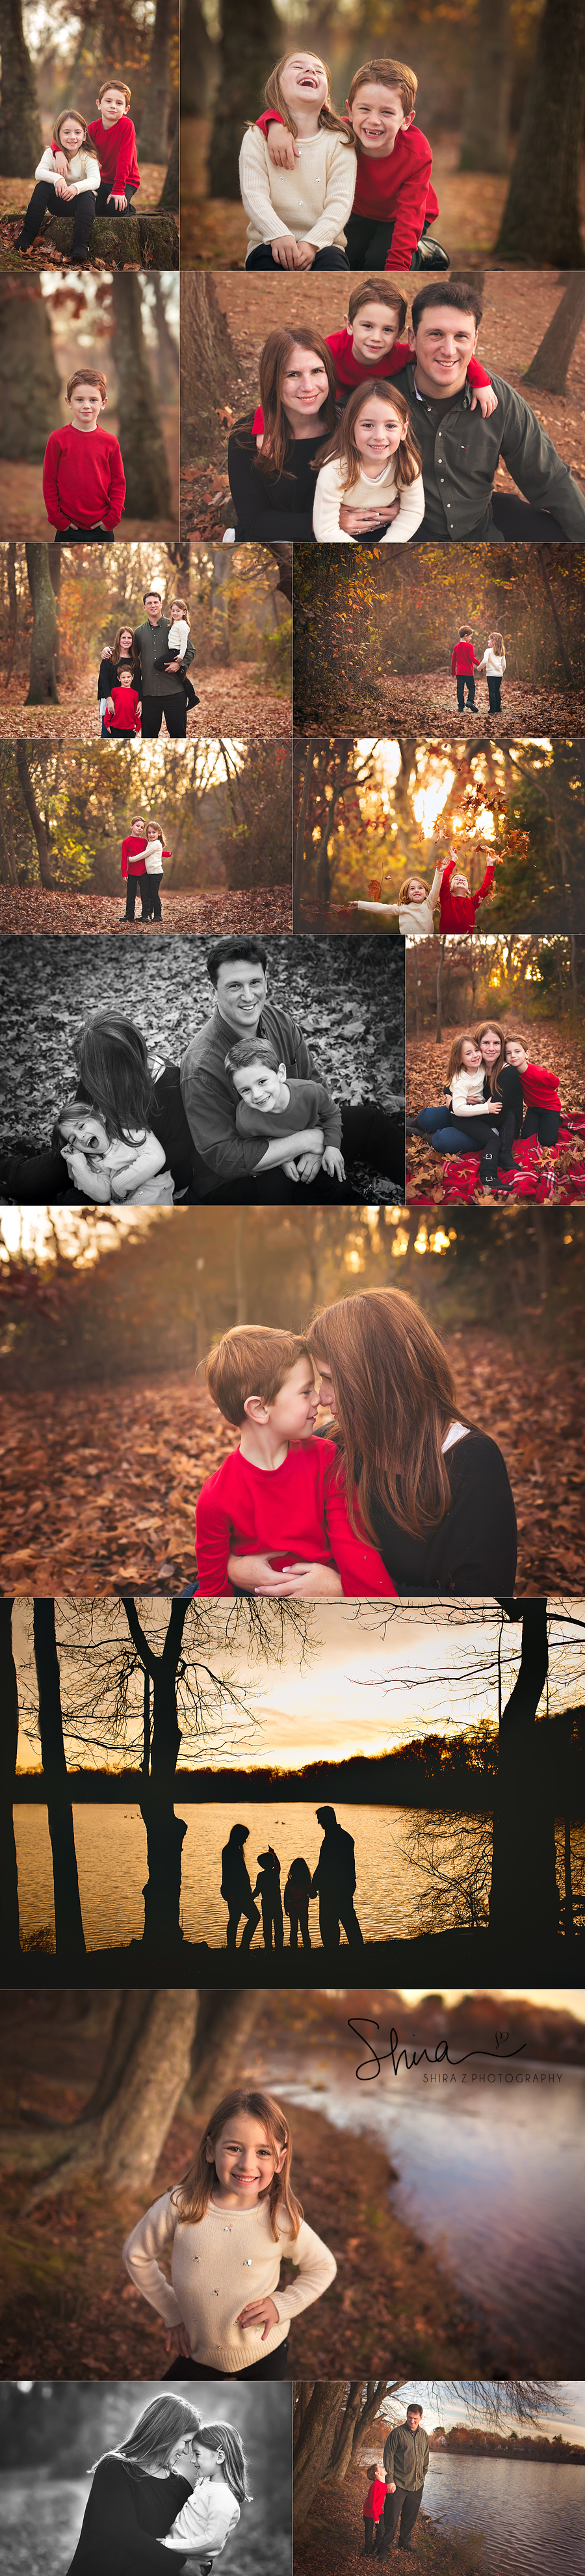 Nassau County Family portraits at a park outdoors